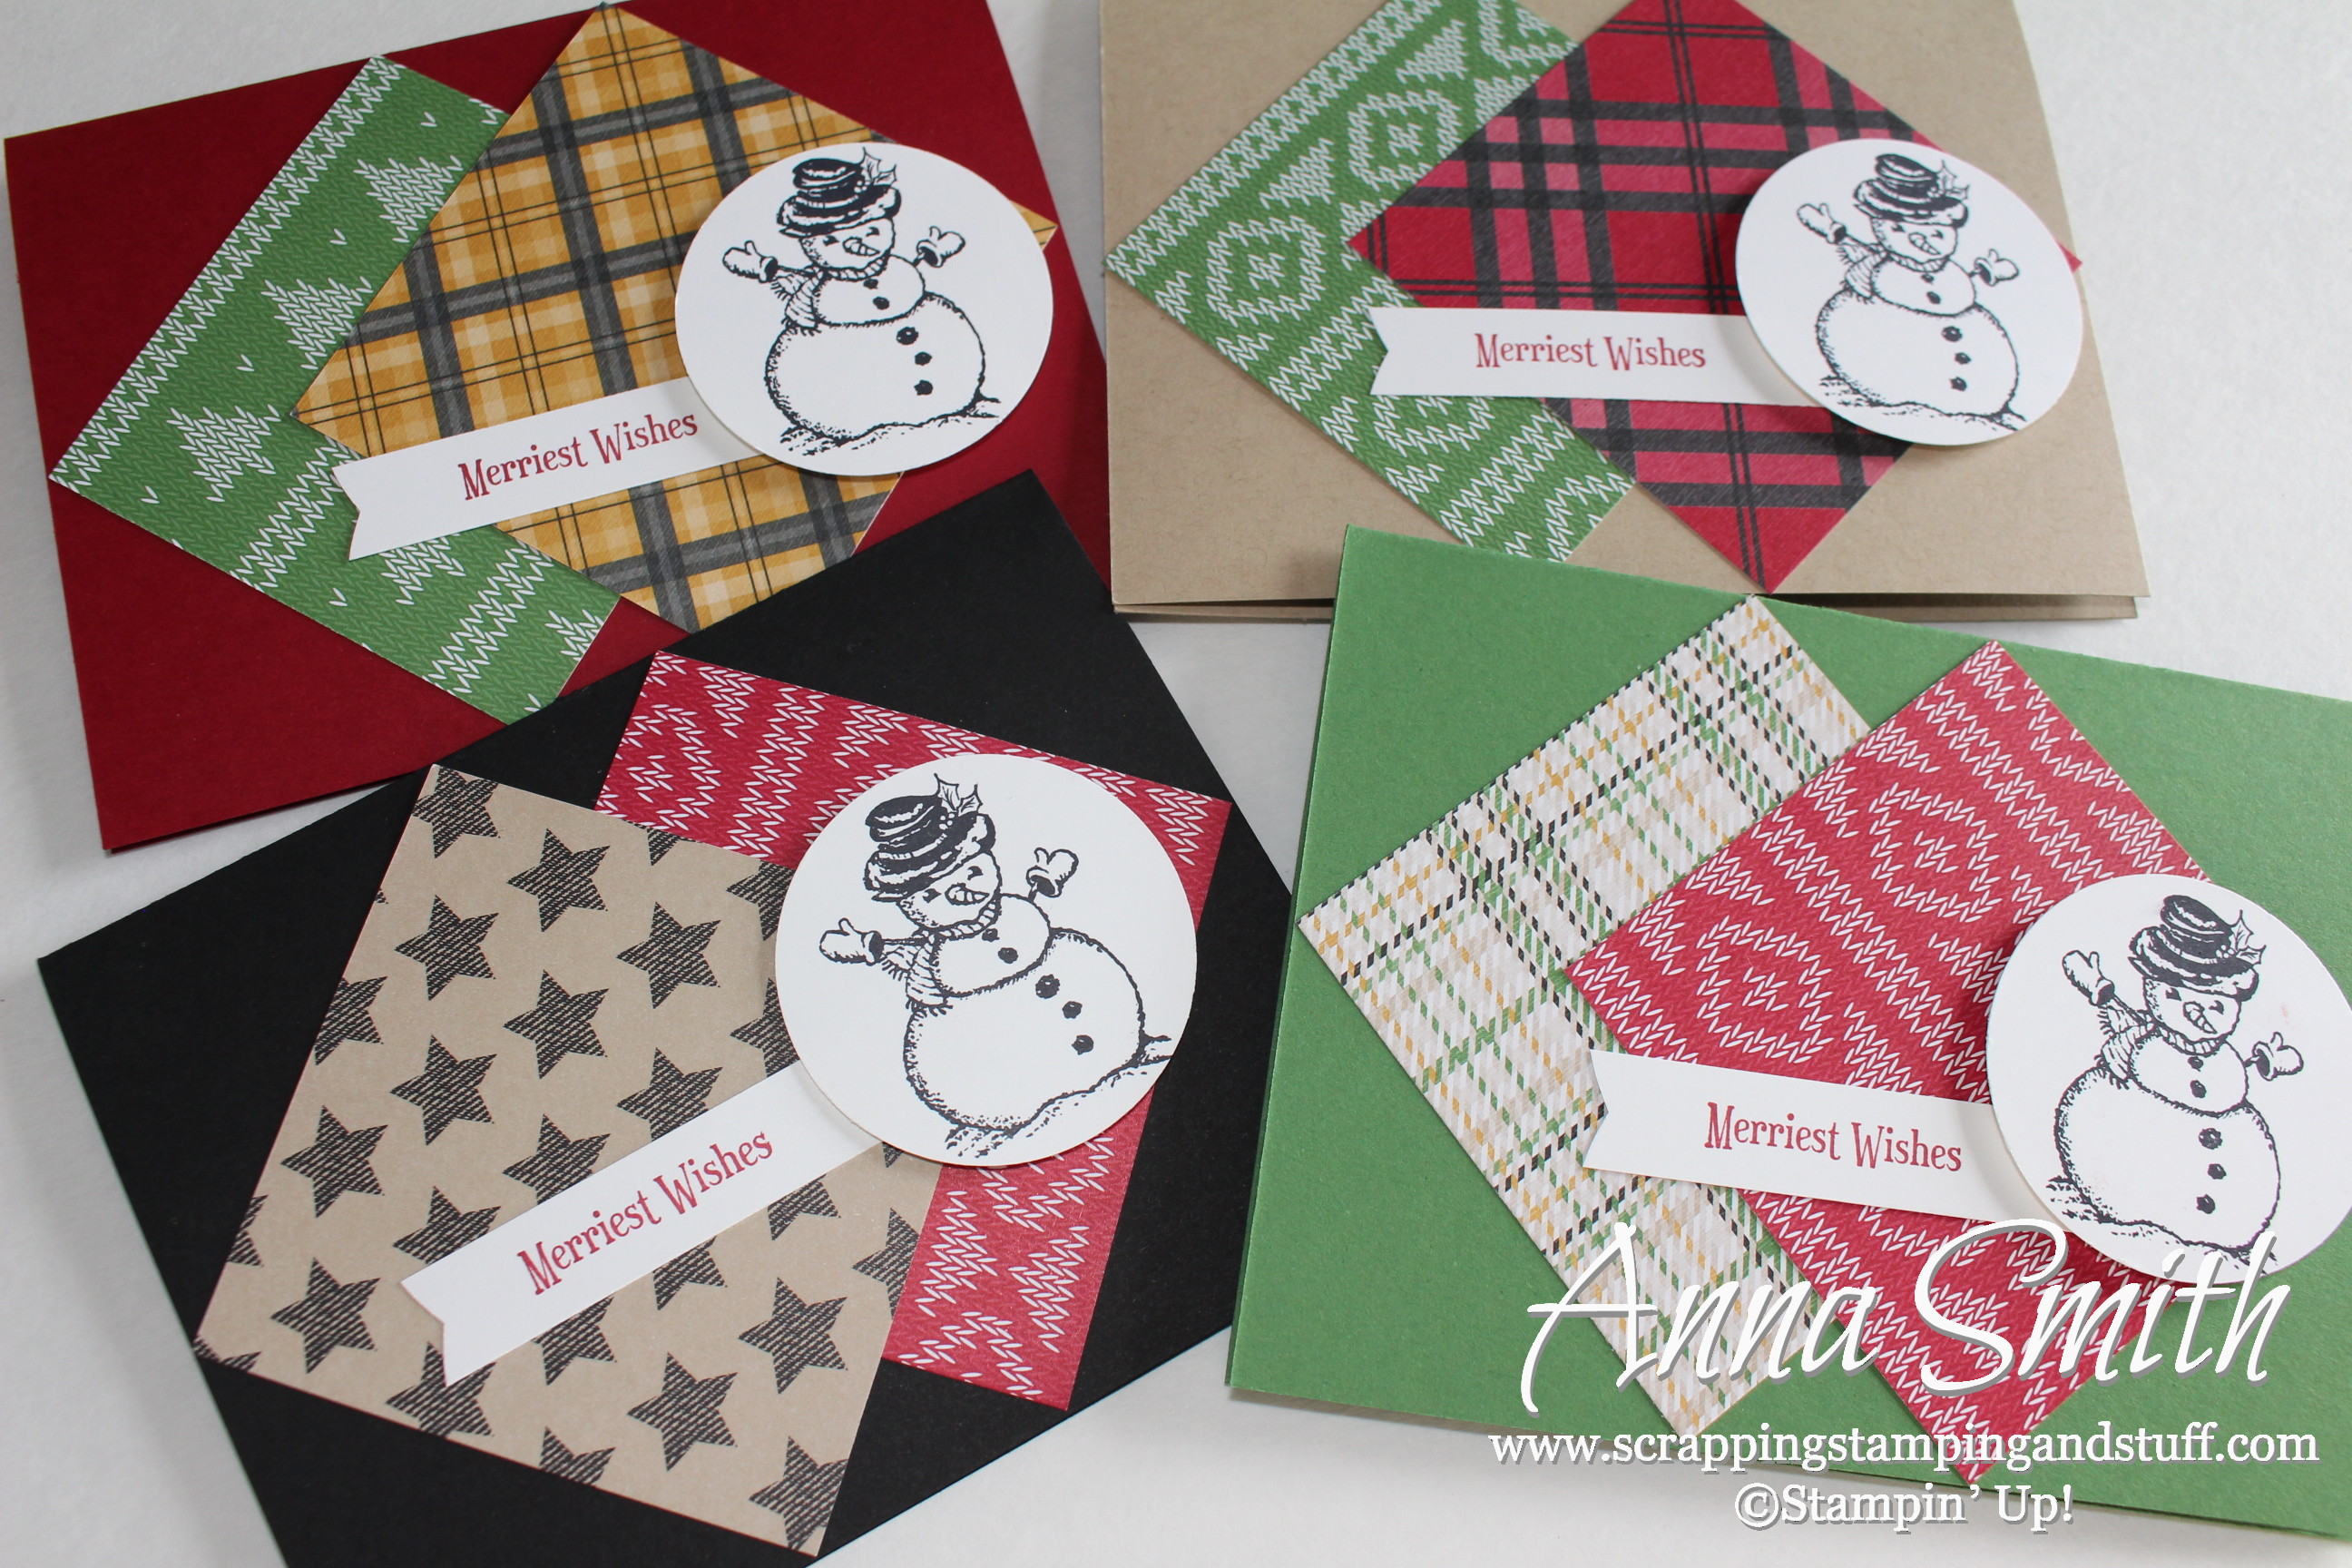 Warmth & Cheer Christmas Cards